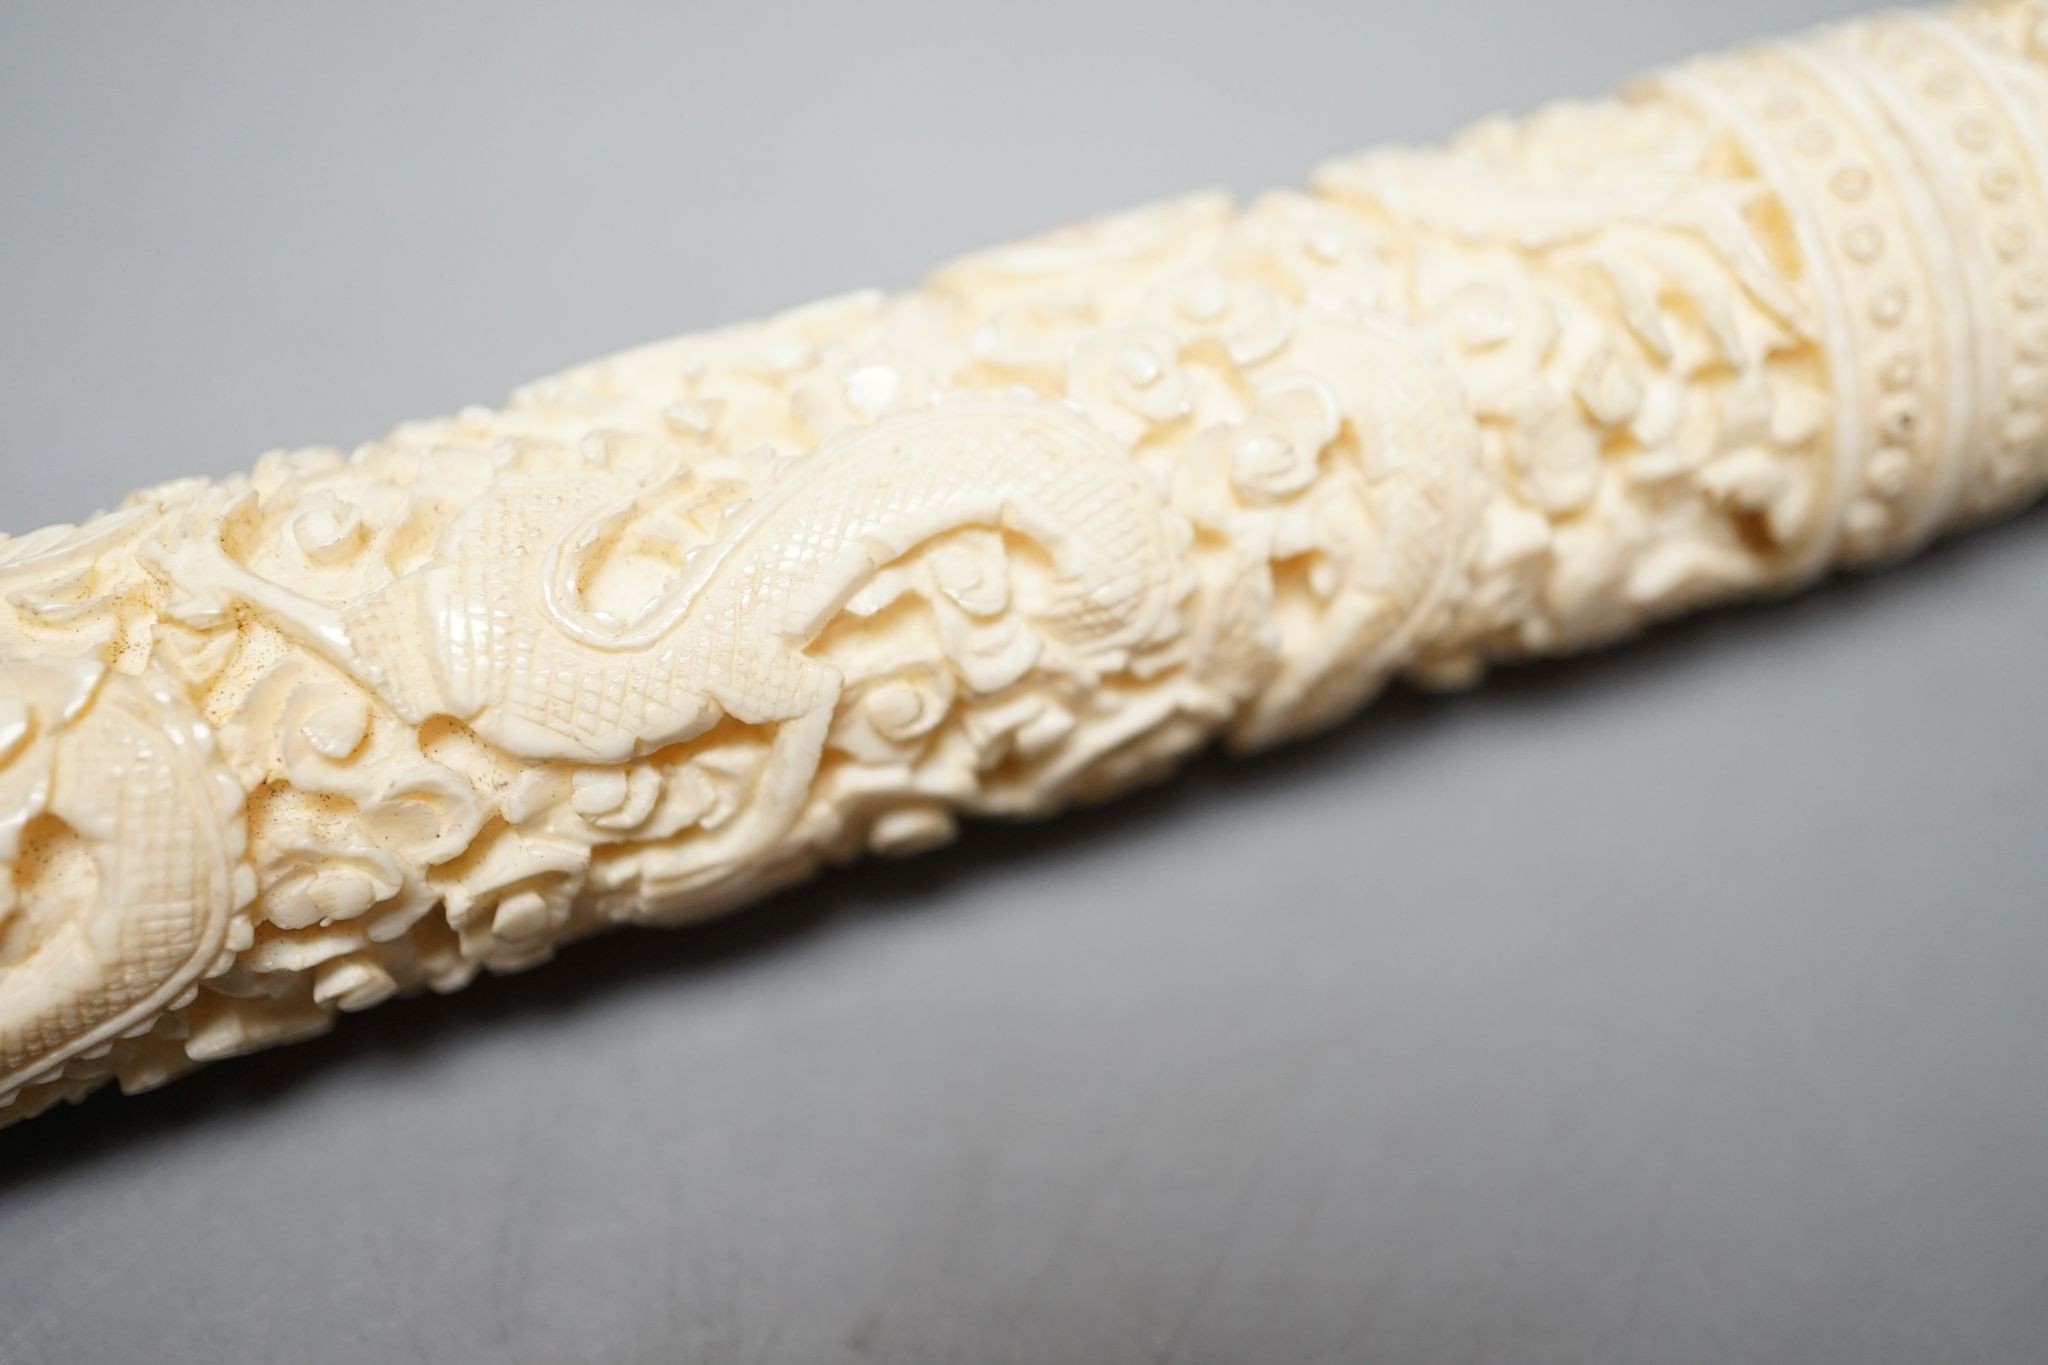 A Chinese export ivory needle case., 16 cms long.